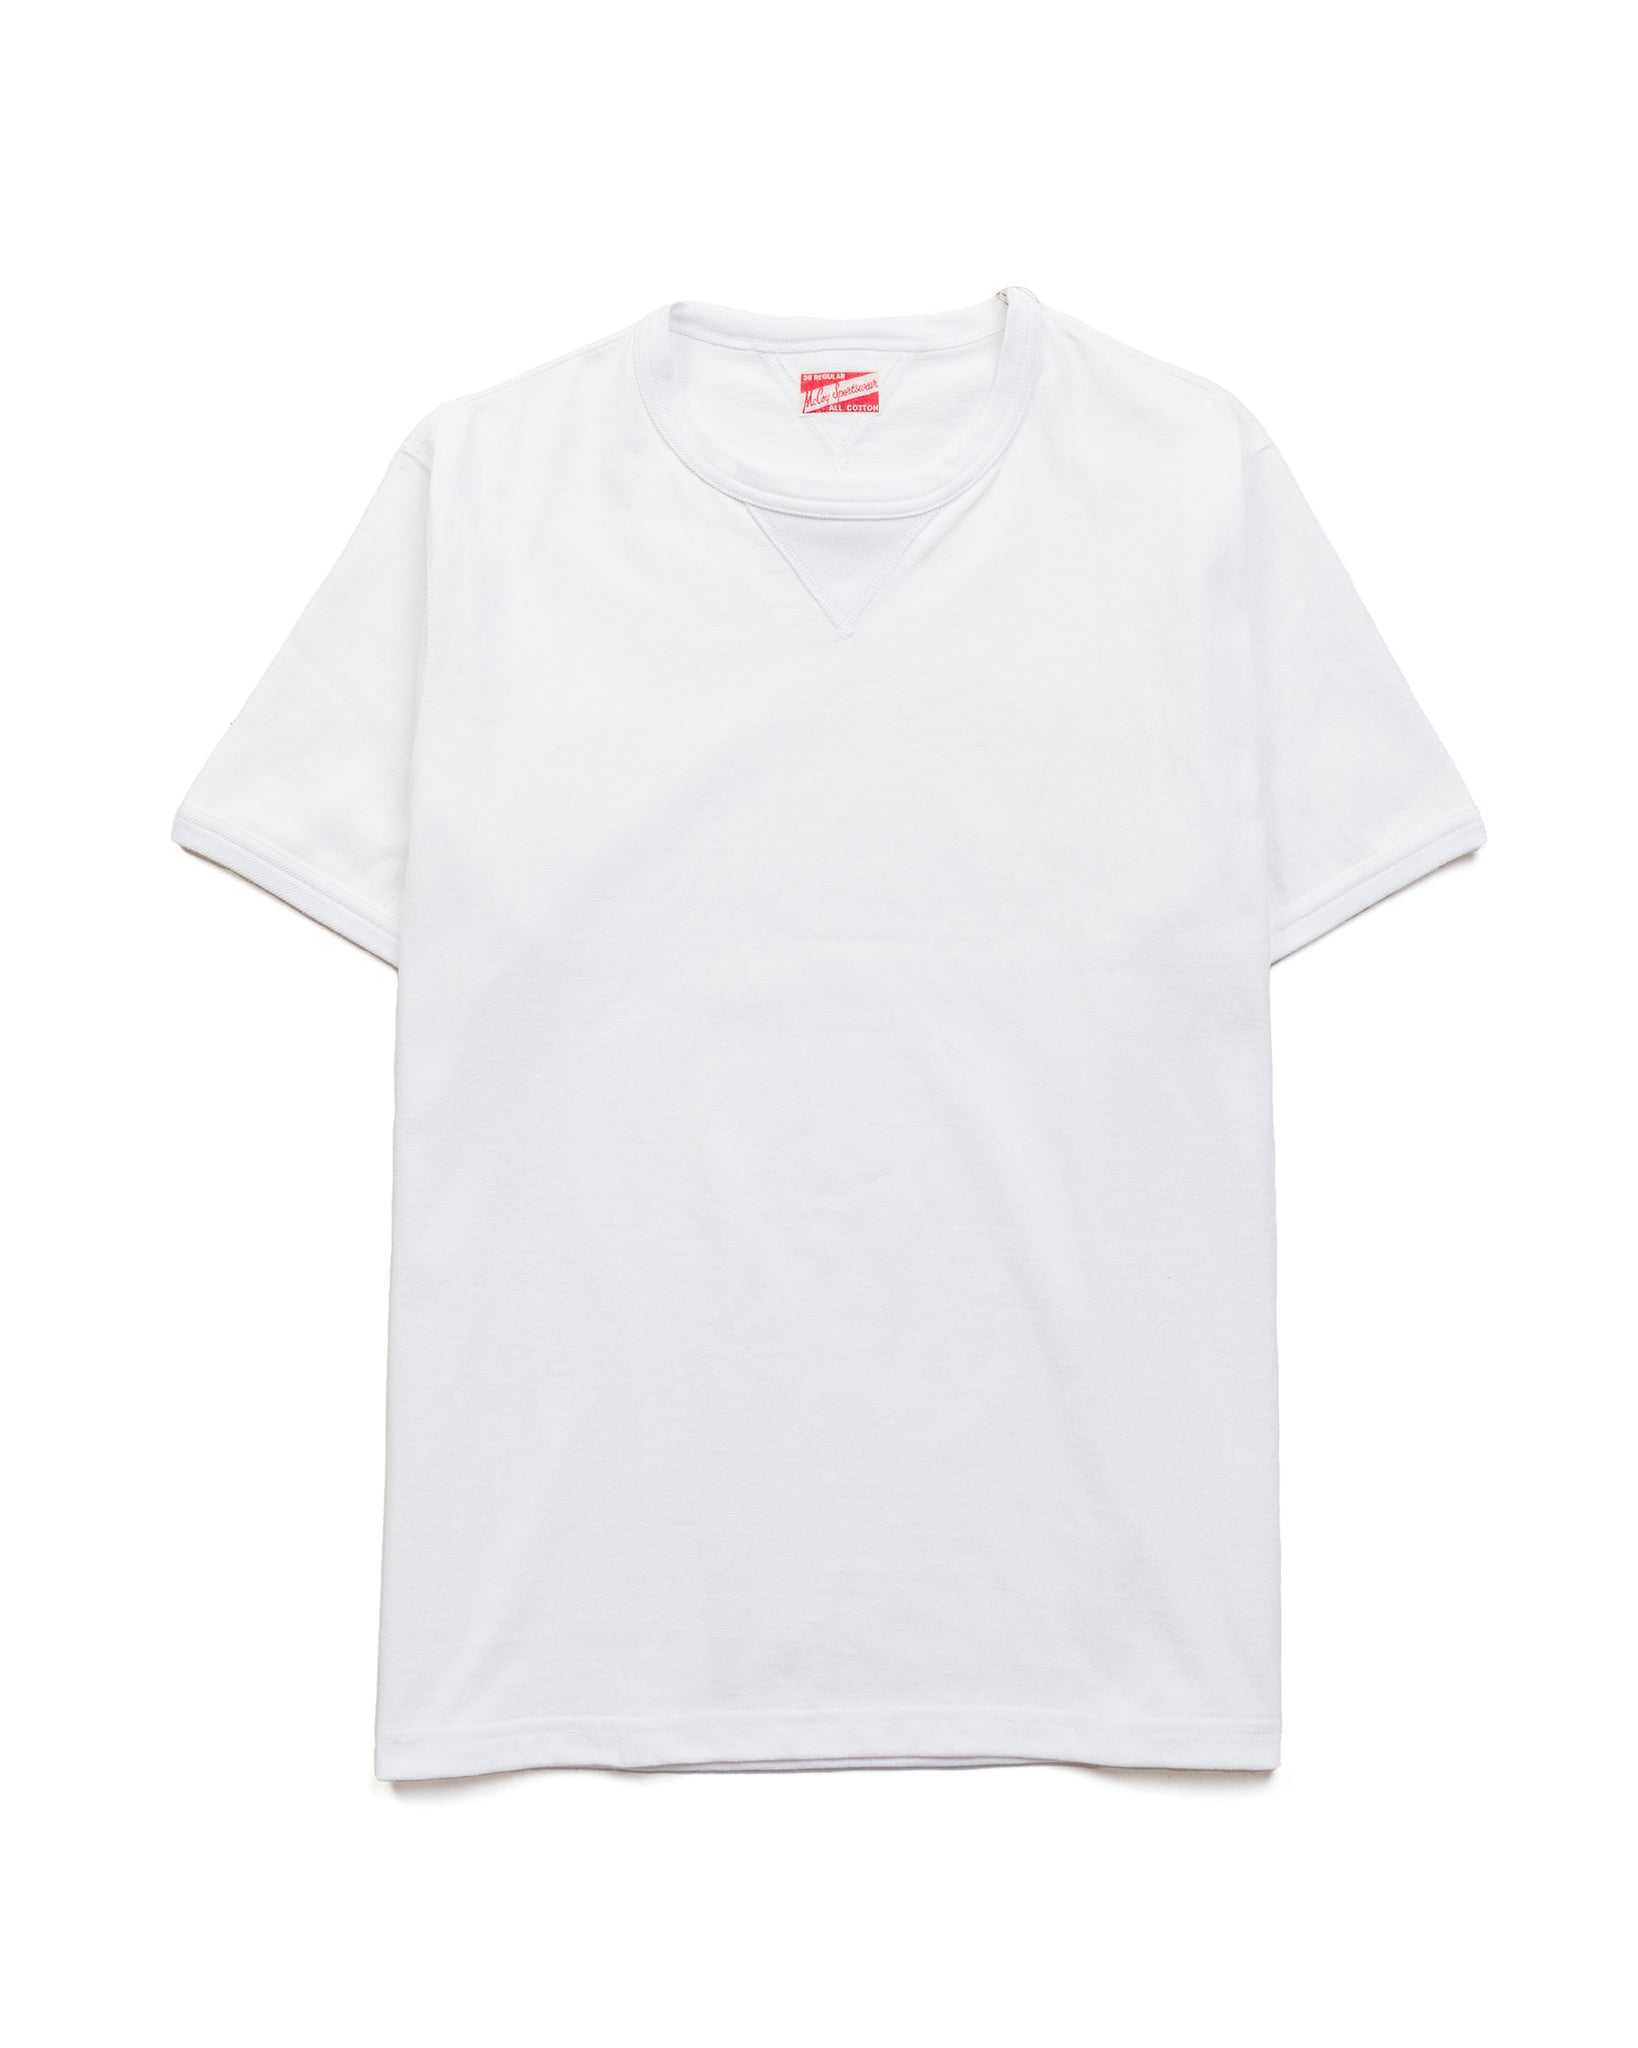 The Real McCoy's MC23020 Gusset Tee White